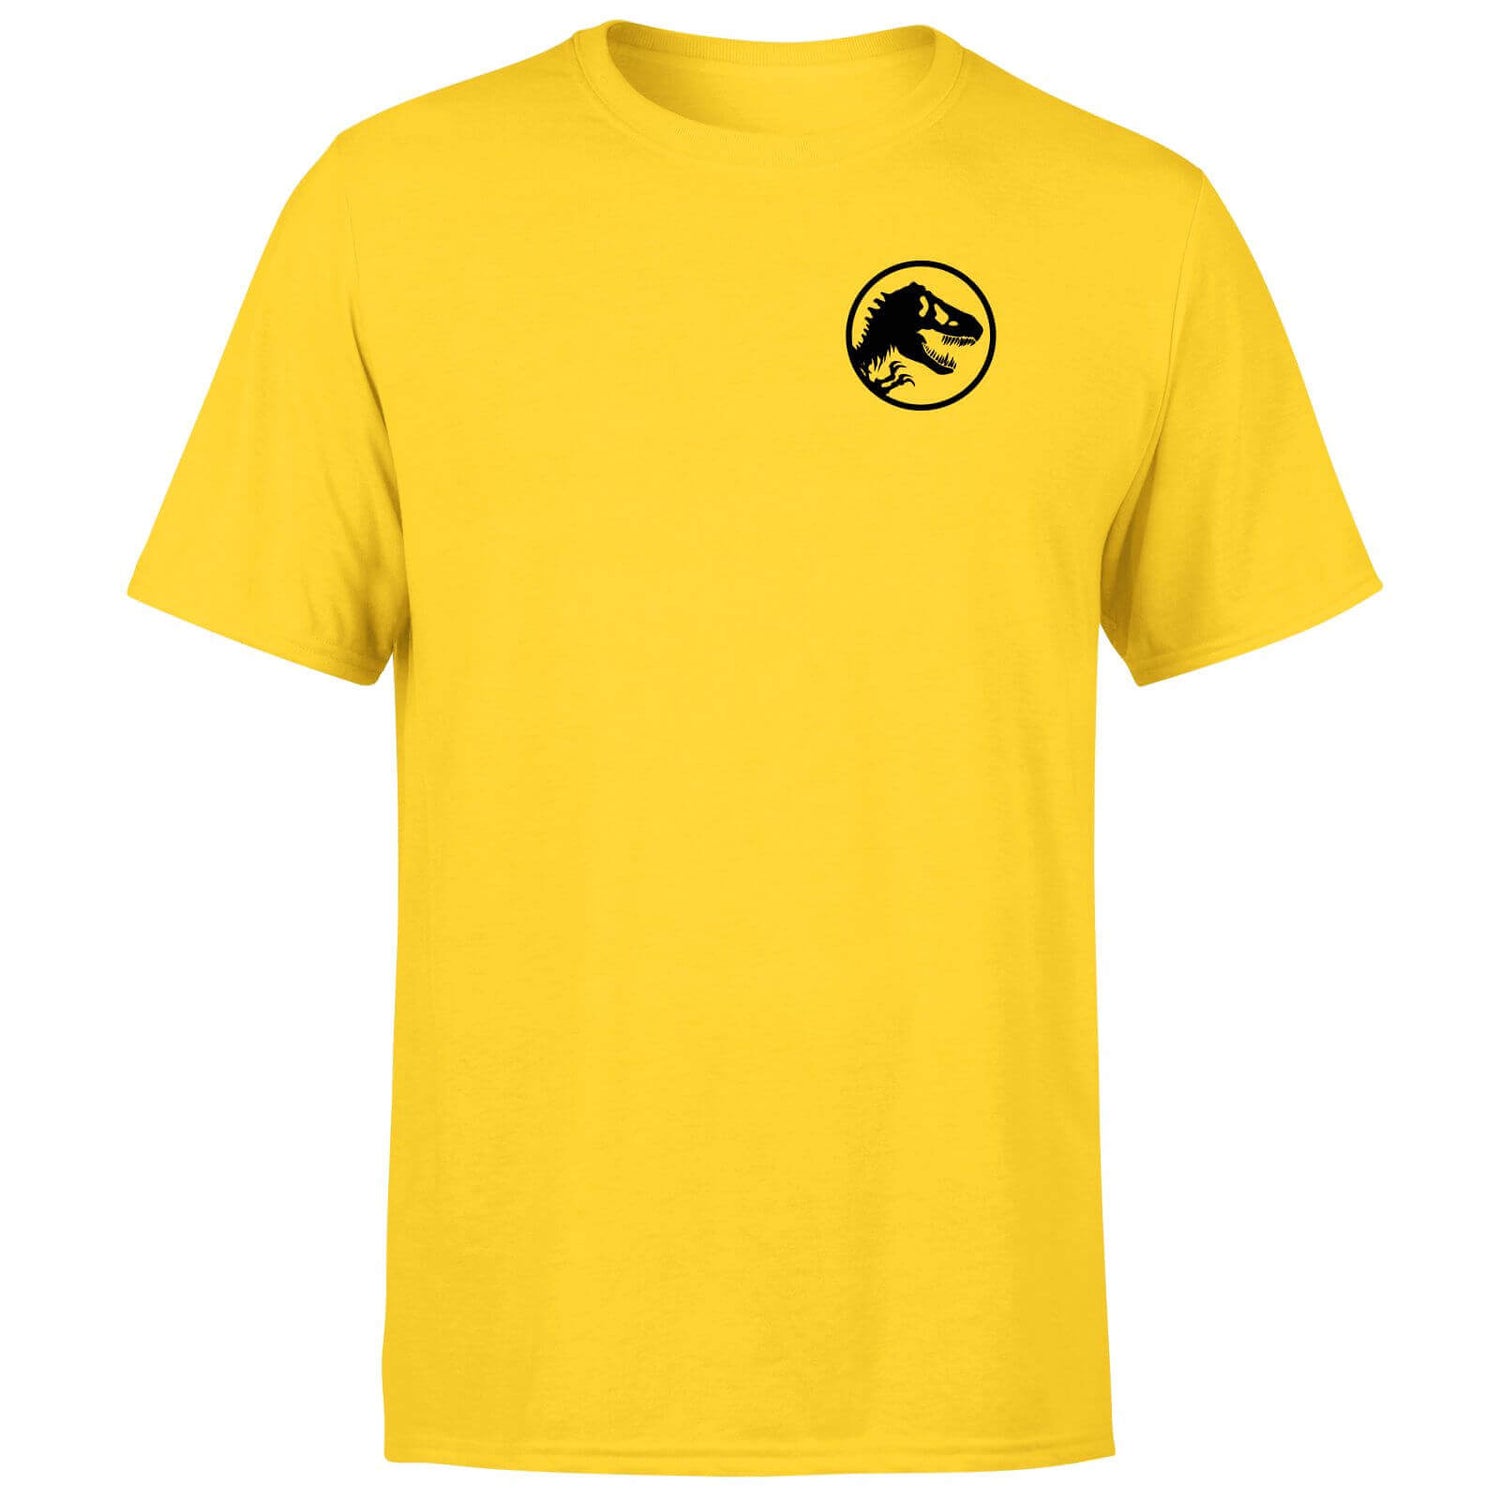 Jurassic Park Silhouette logo Embroidered Unisex T-Shirt - Yellow